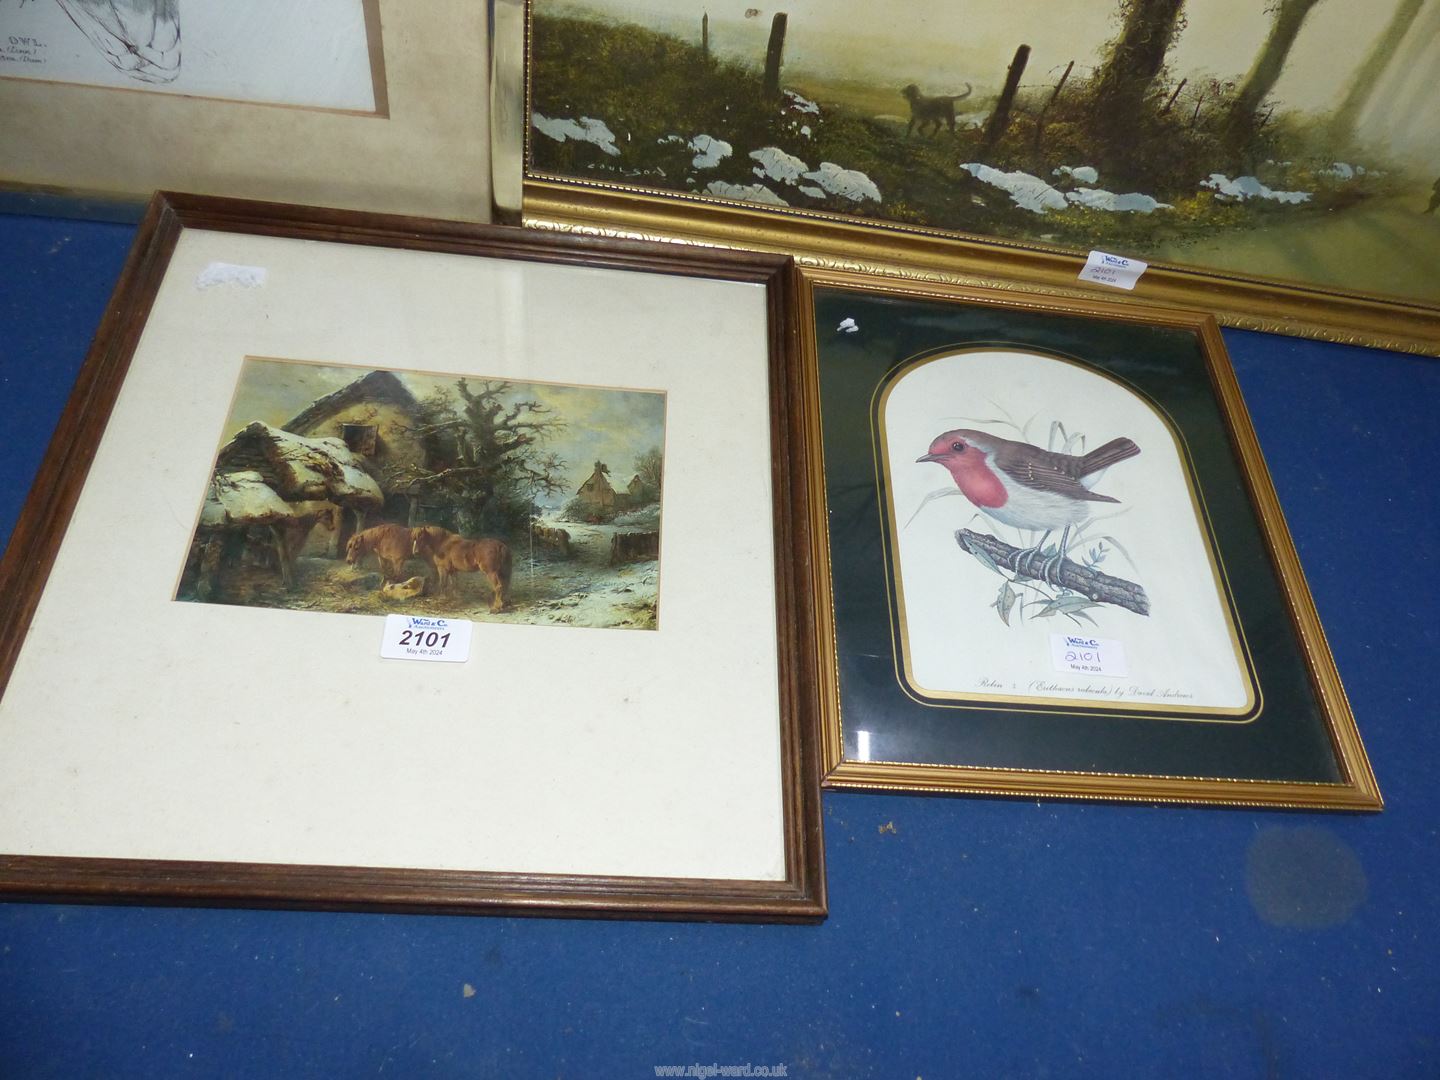 A framed and mounted print "Winter" by Edward Robert Smythe, a print of a Robin, an E. - Image 2 of 4